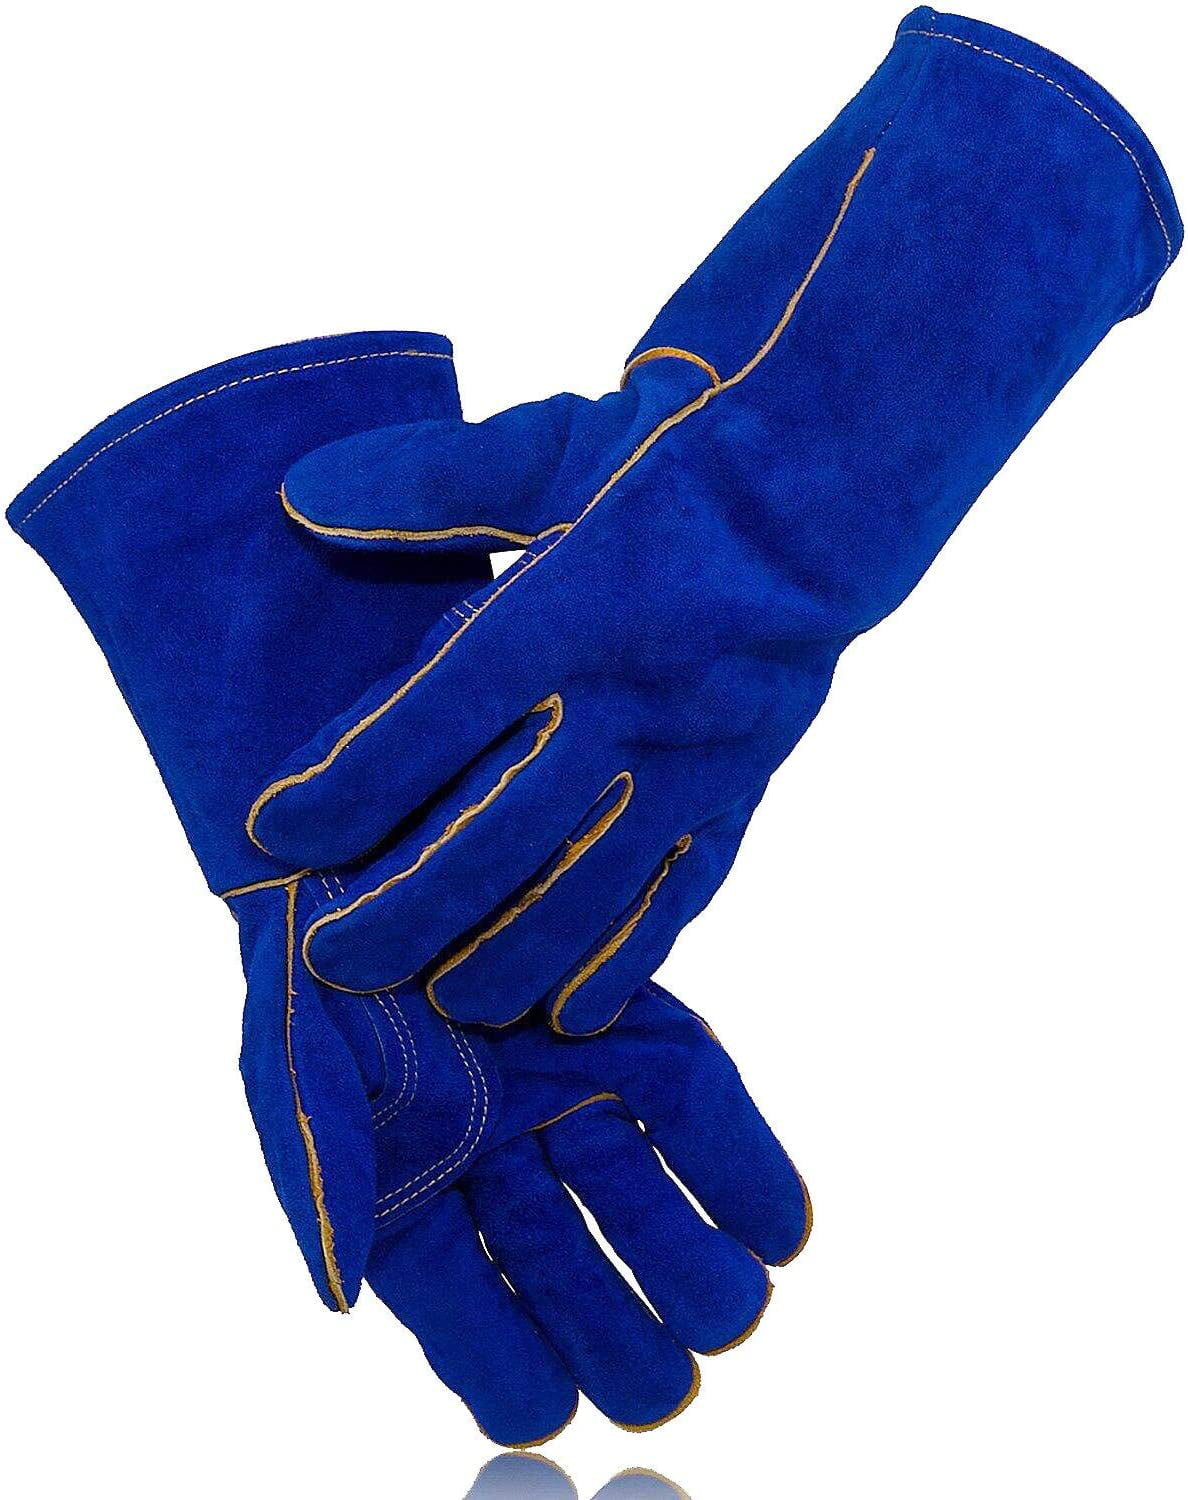 3M Premium Safety Heat Resistant Gloves FIT For Hot Works Camping BBQ ARAMID 